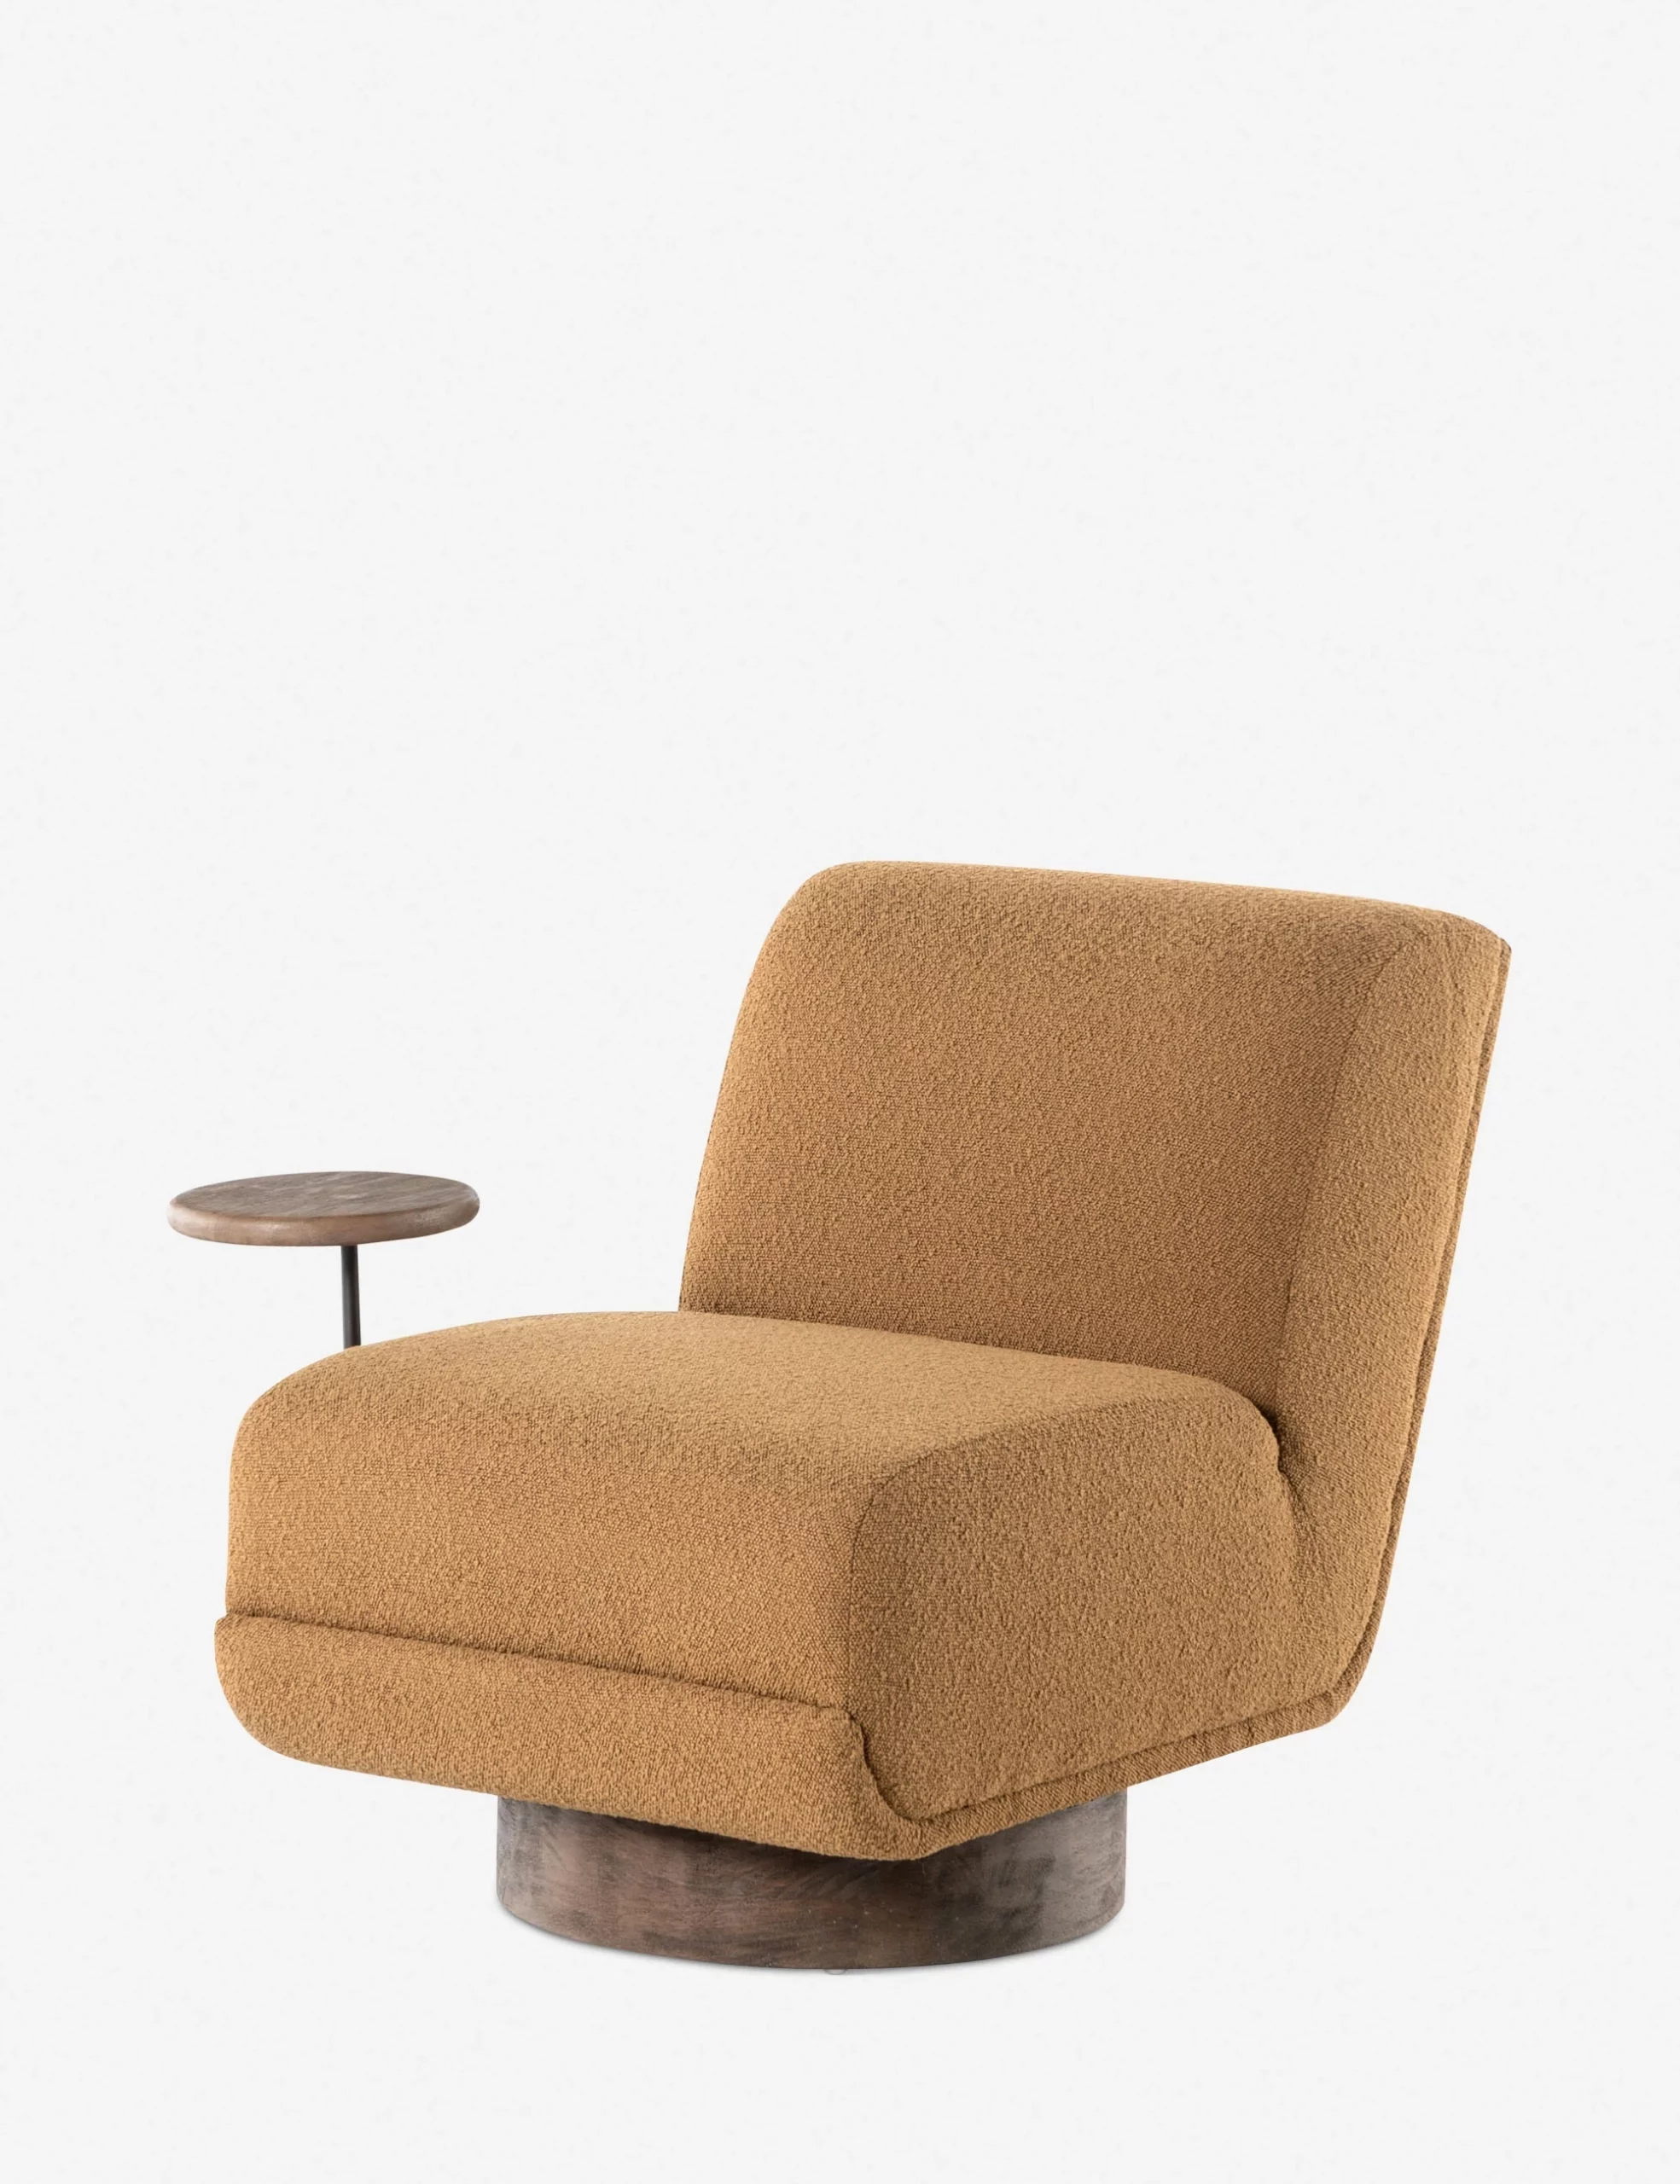 Go For Convenience With A Side Table Swivel Chair